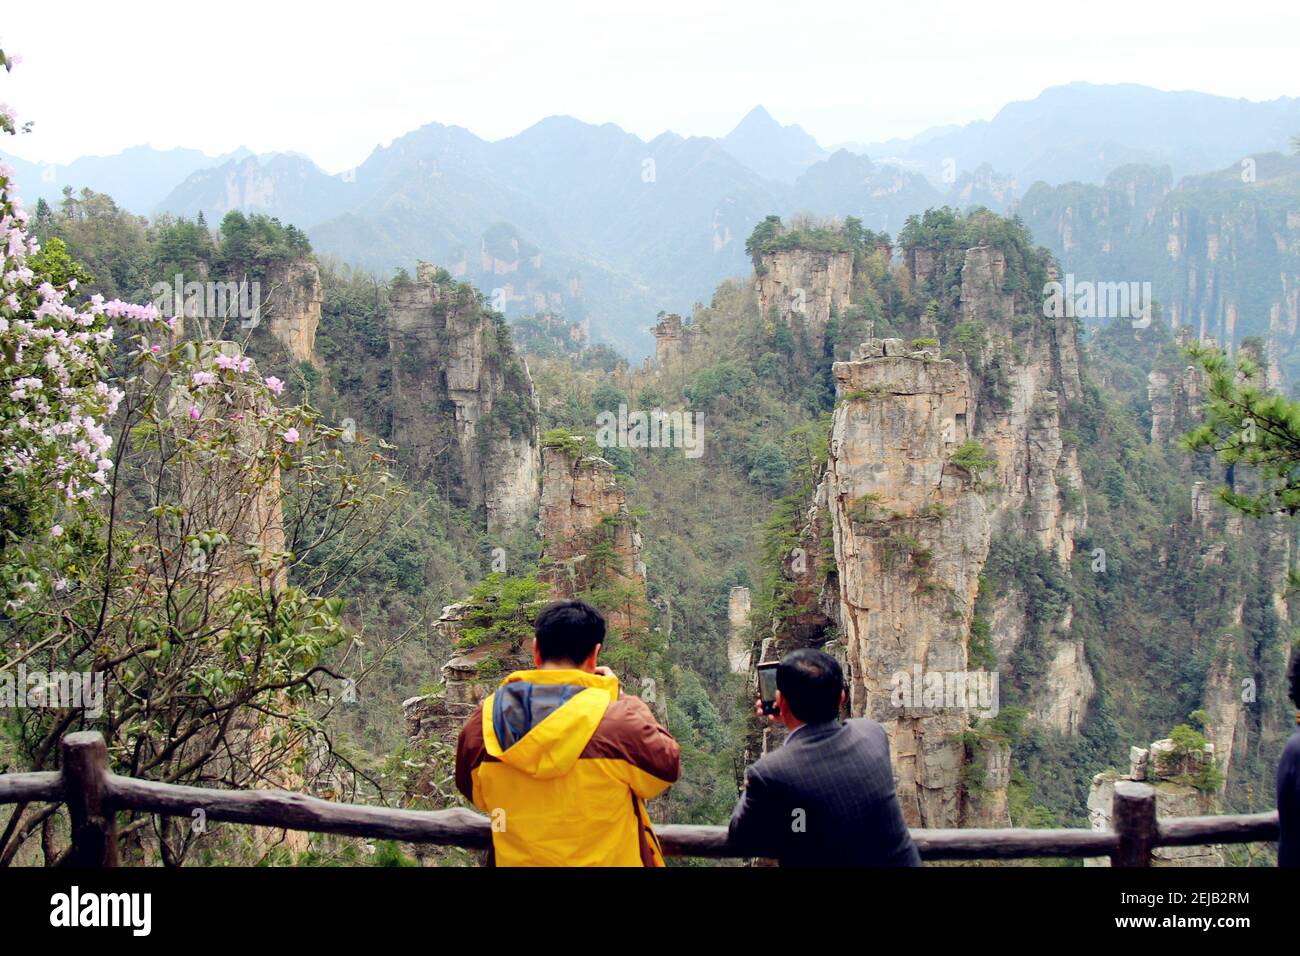 Hunan,CHINA-With the popularity of the "avatar" sequel, the alien scene of " Pandora", yuanjiajie 5A scenic spot in Zhangjiajie national forest park in  Hunan province, has become a popular tourist attraction in China